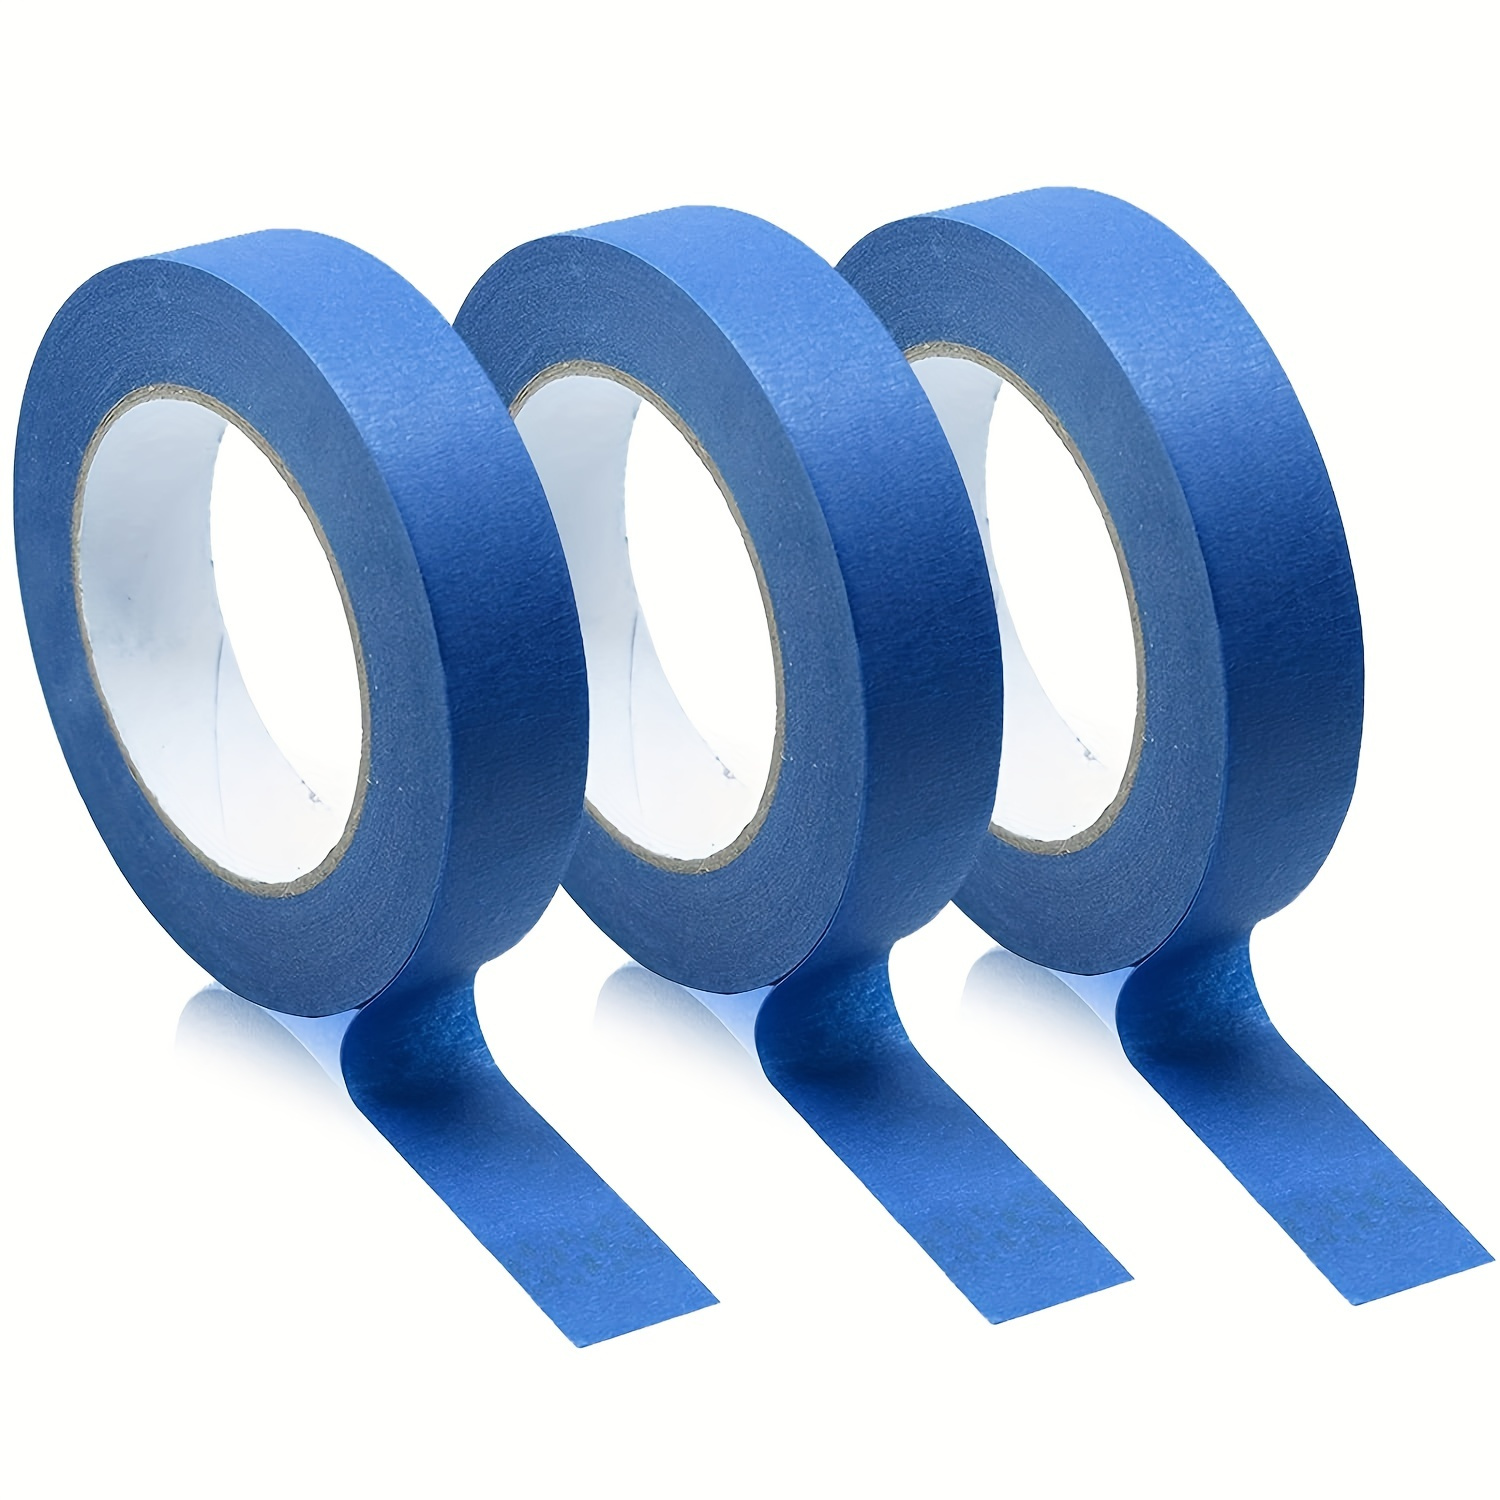 

0.7 Inch X 66 Ft Multi-surface Painters Tape - 3 Rolls Of Blue Crepe Paper Masking Tape For Wall, Painting, Crafts & More!